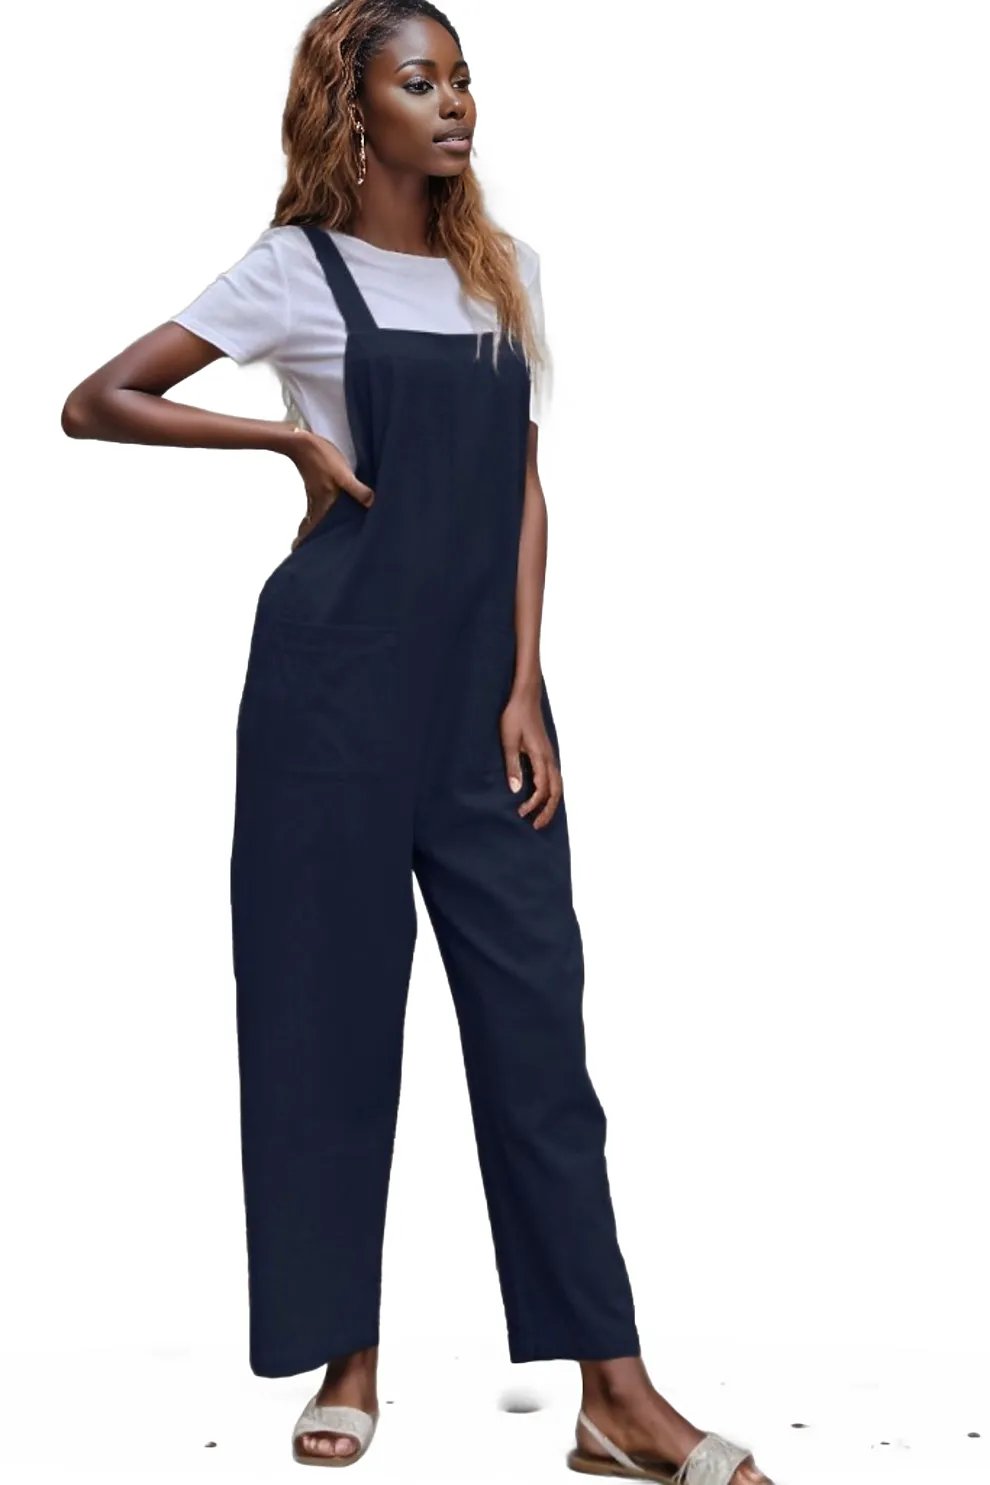 Dual Pocket Solid Overall Jumpsuit Without Tee